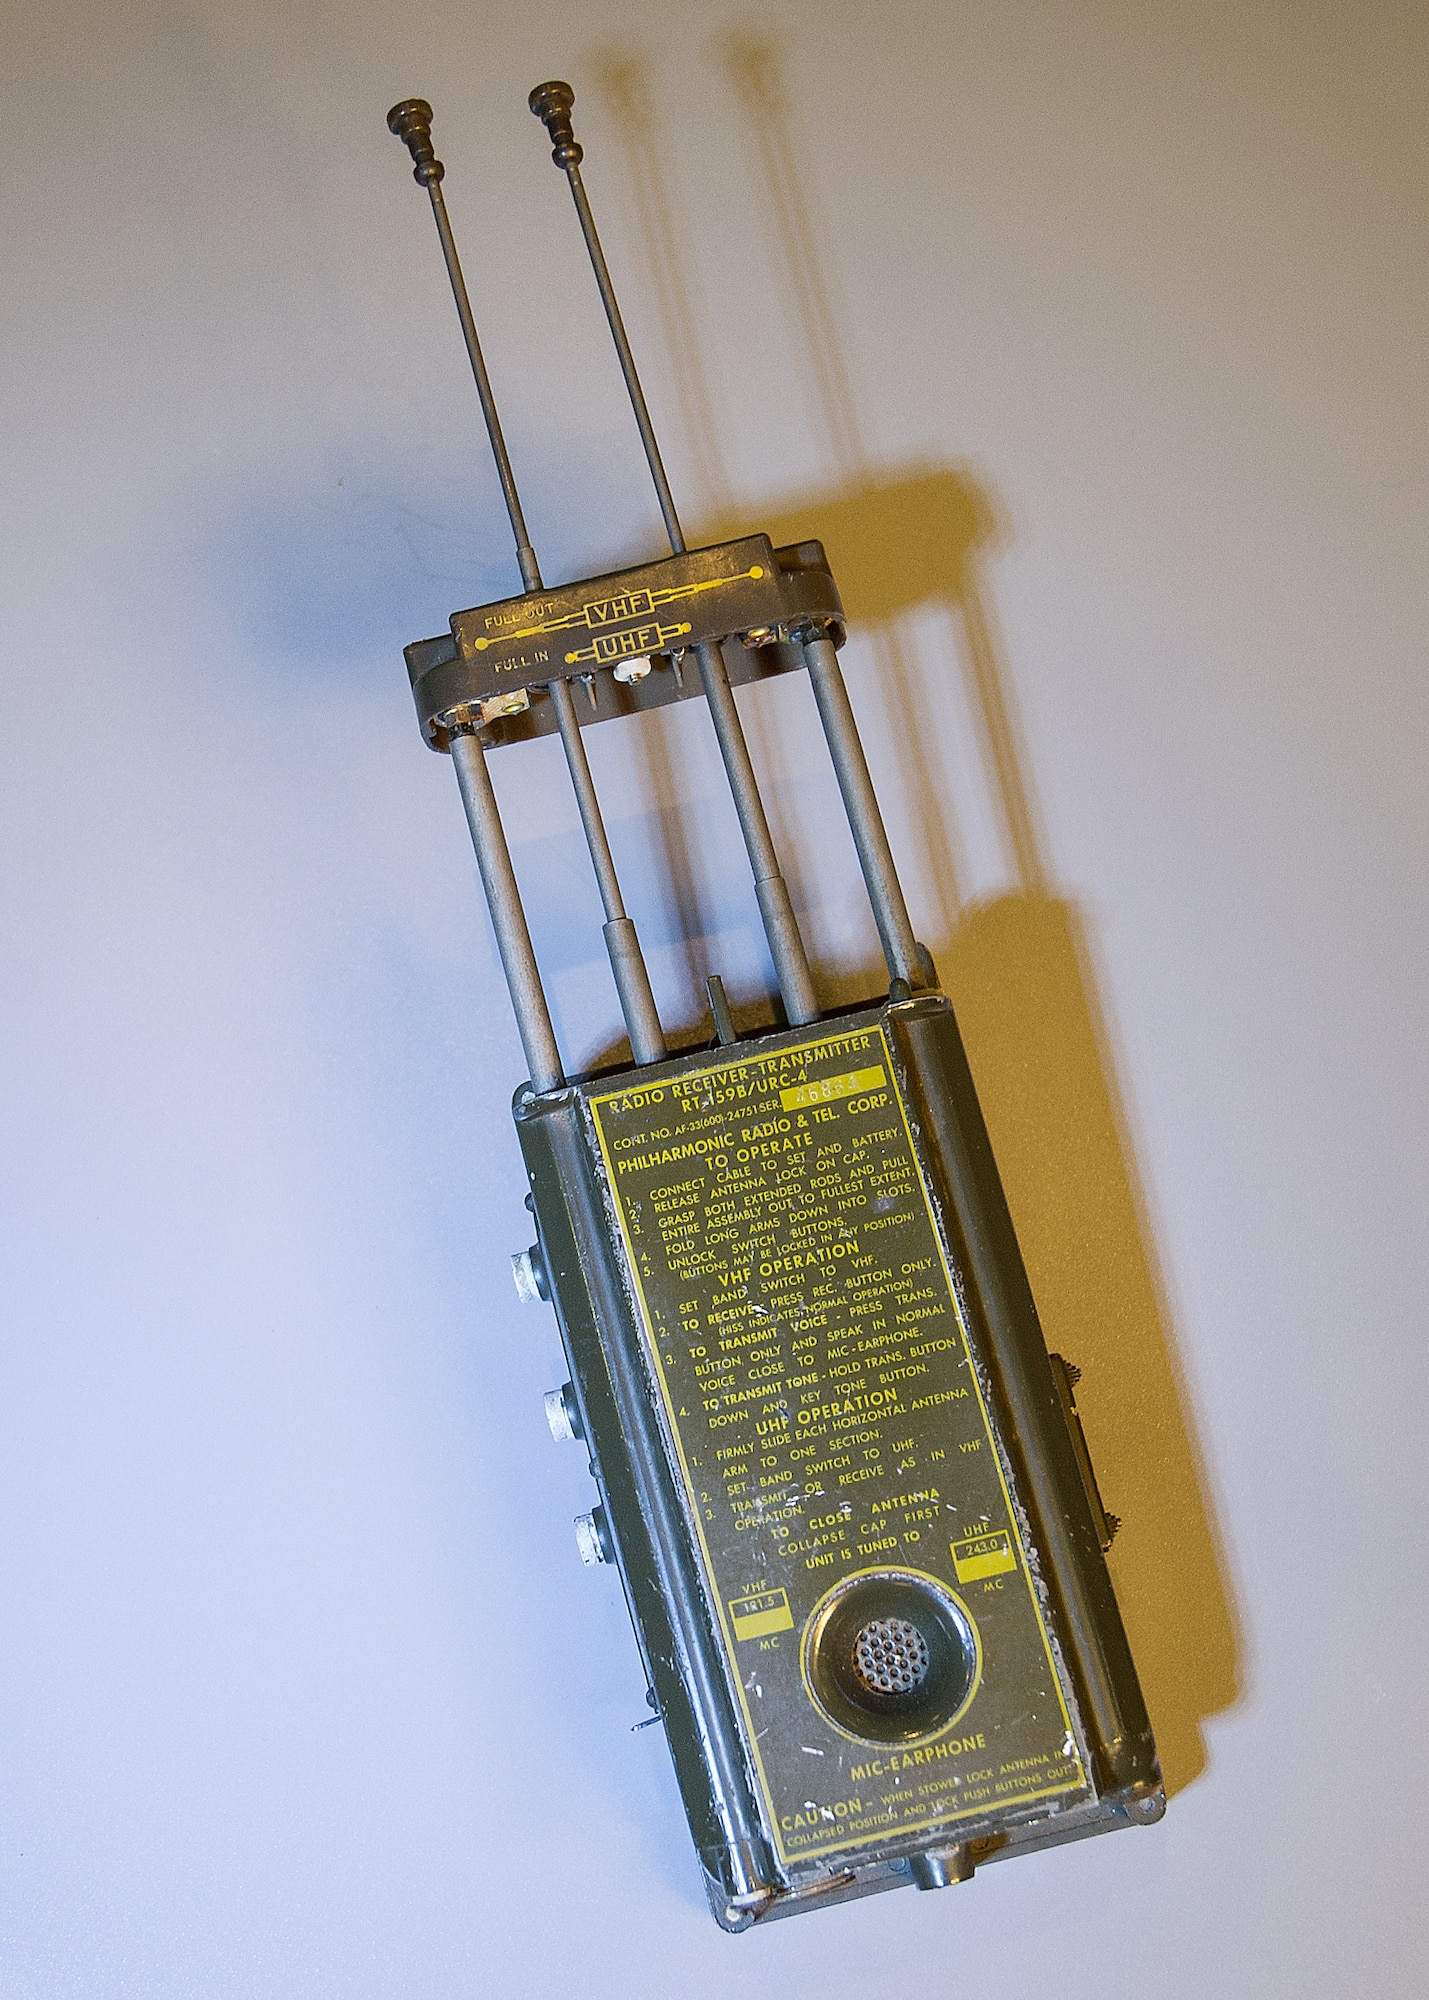 DAYTON, Ohio -- AN/URC-4 survival radio in the Korean War Gallery at the National Museum of the U.S. Air Force. (U.S. Air Force photo)